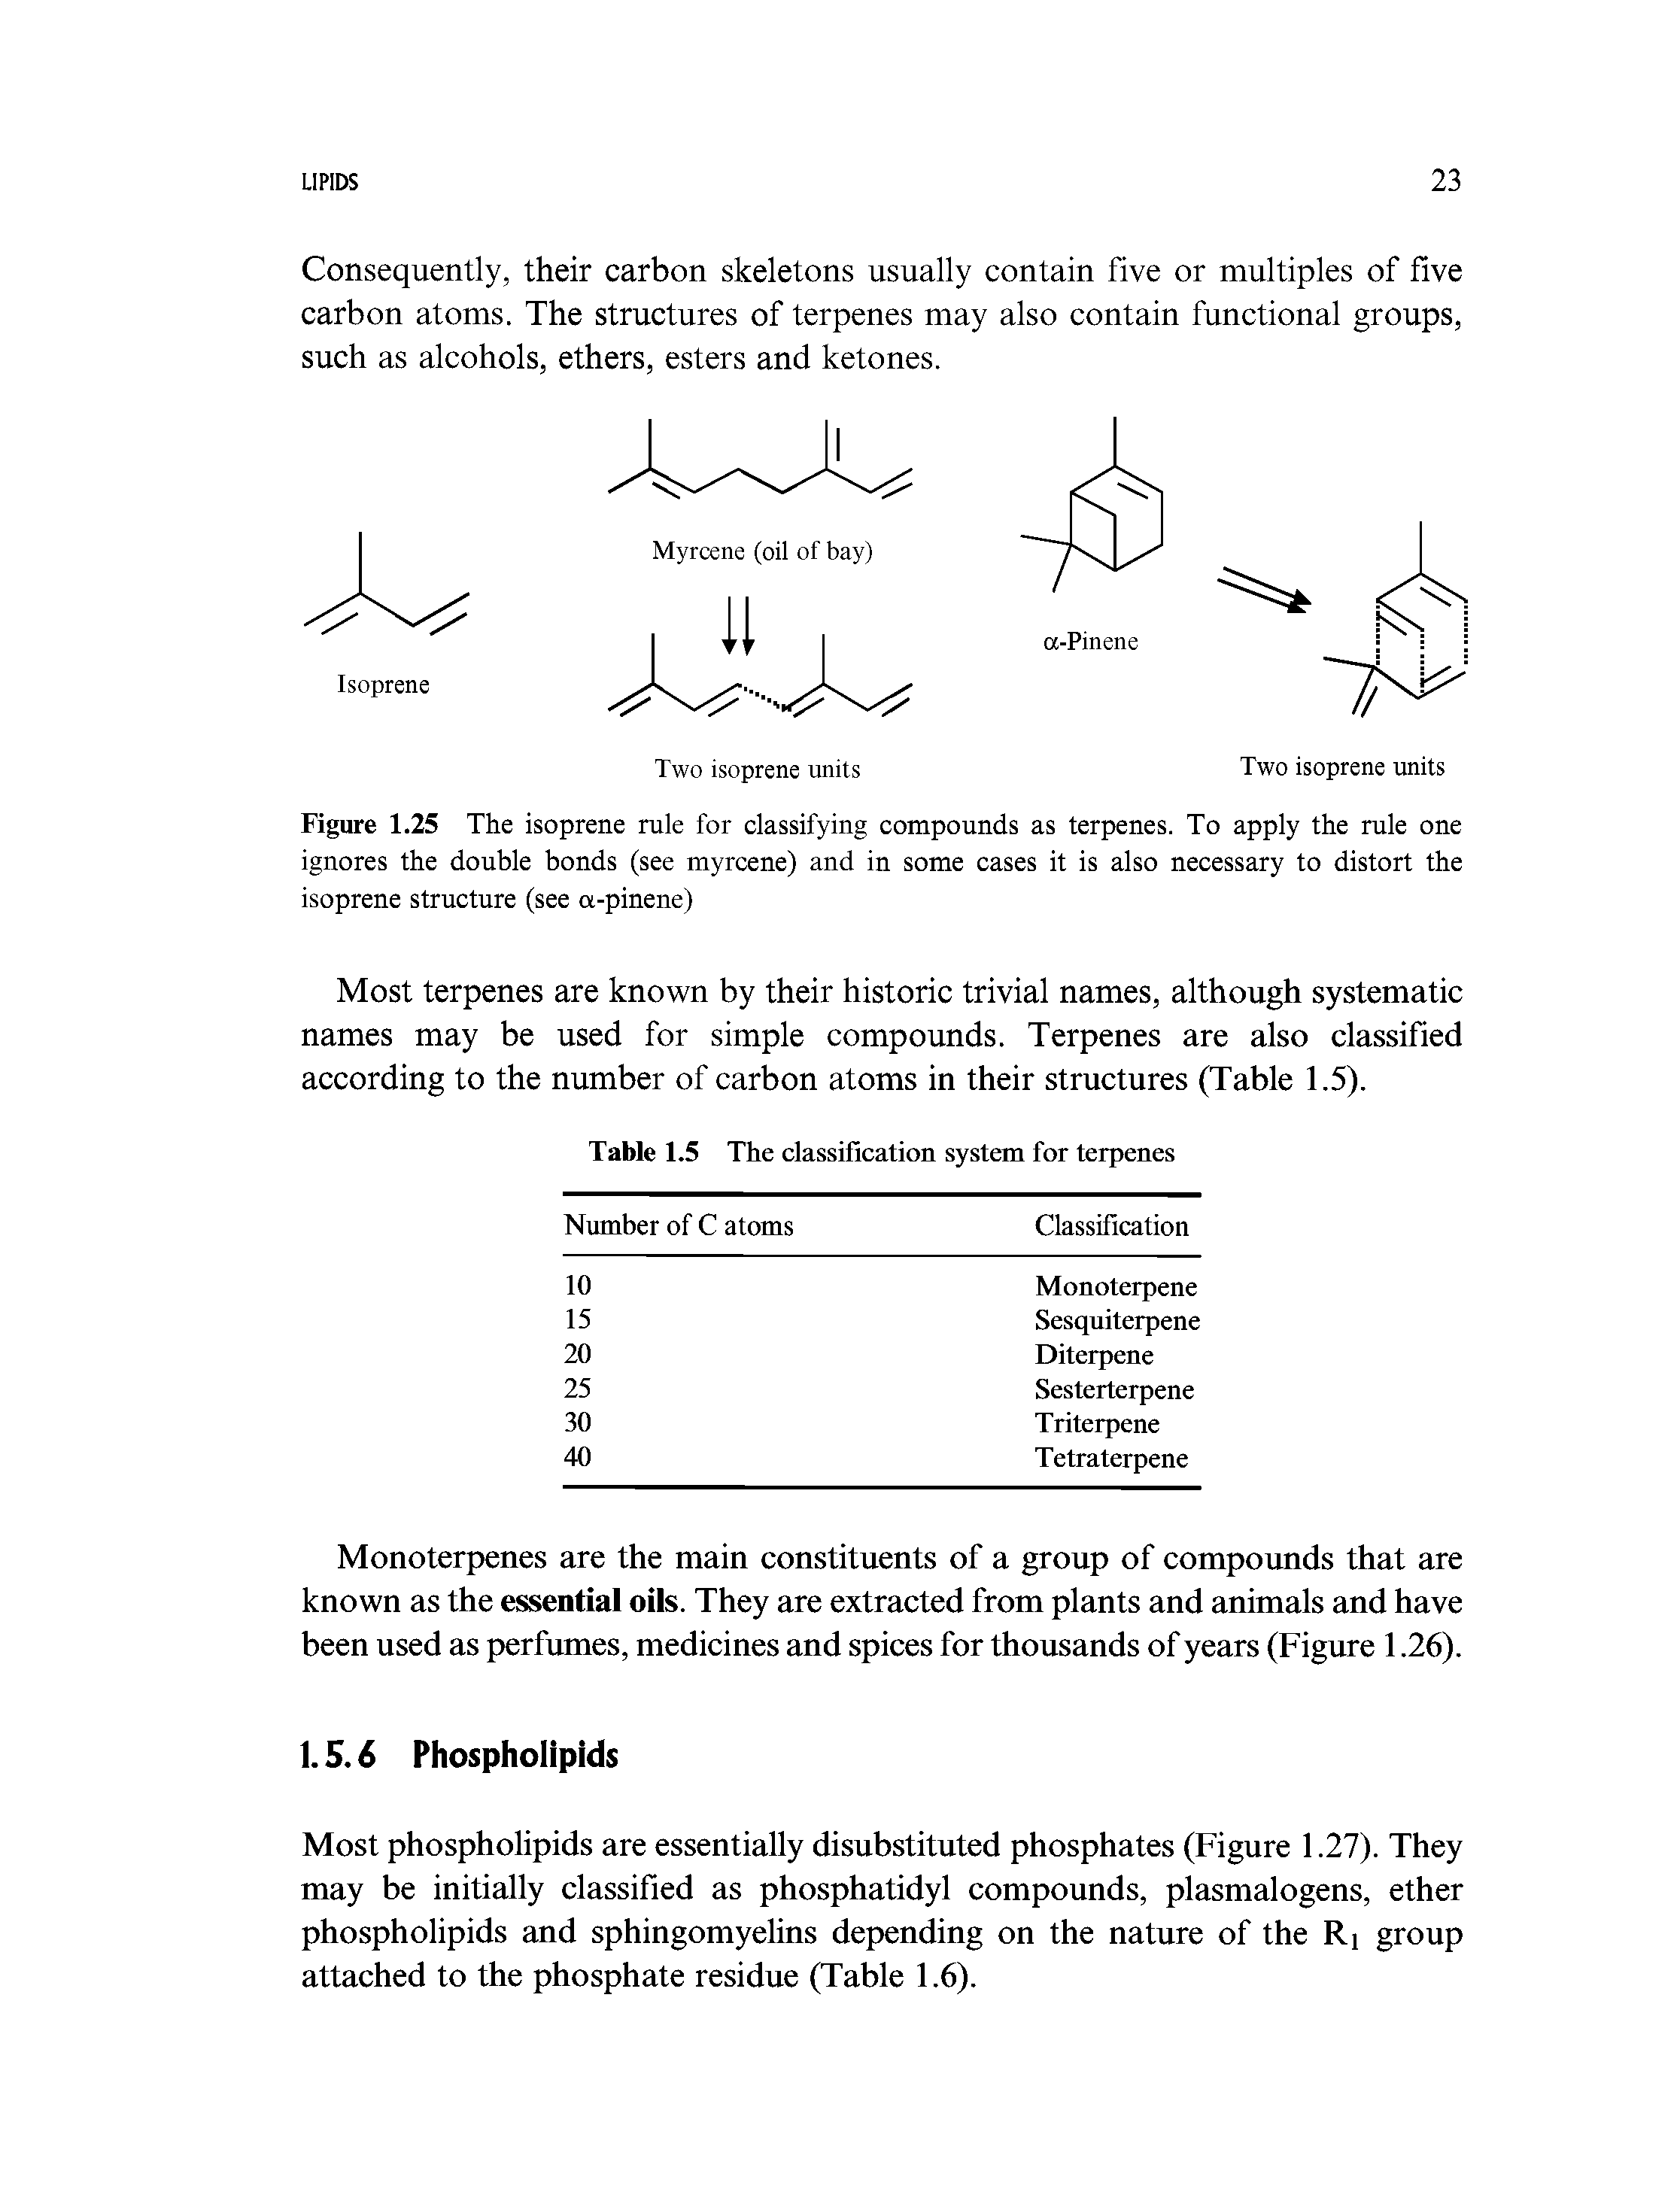 Figure 1.25 The isoprene rule for classifying compounds as terpenes. To apply the rule one ignores the double bonds (see myrcene) and in some cases it is also necessary to distort the isoprene structure (see a-pinene)...